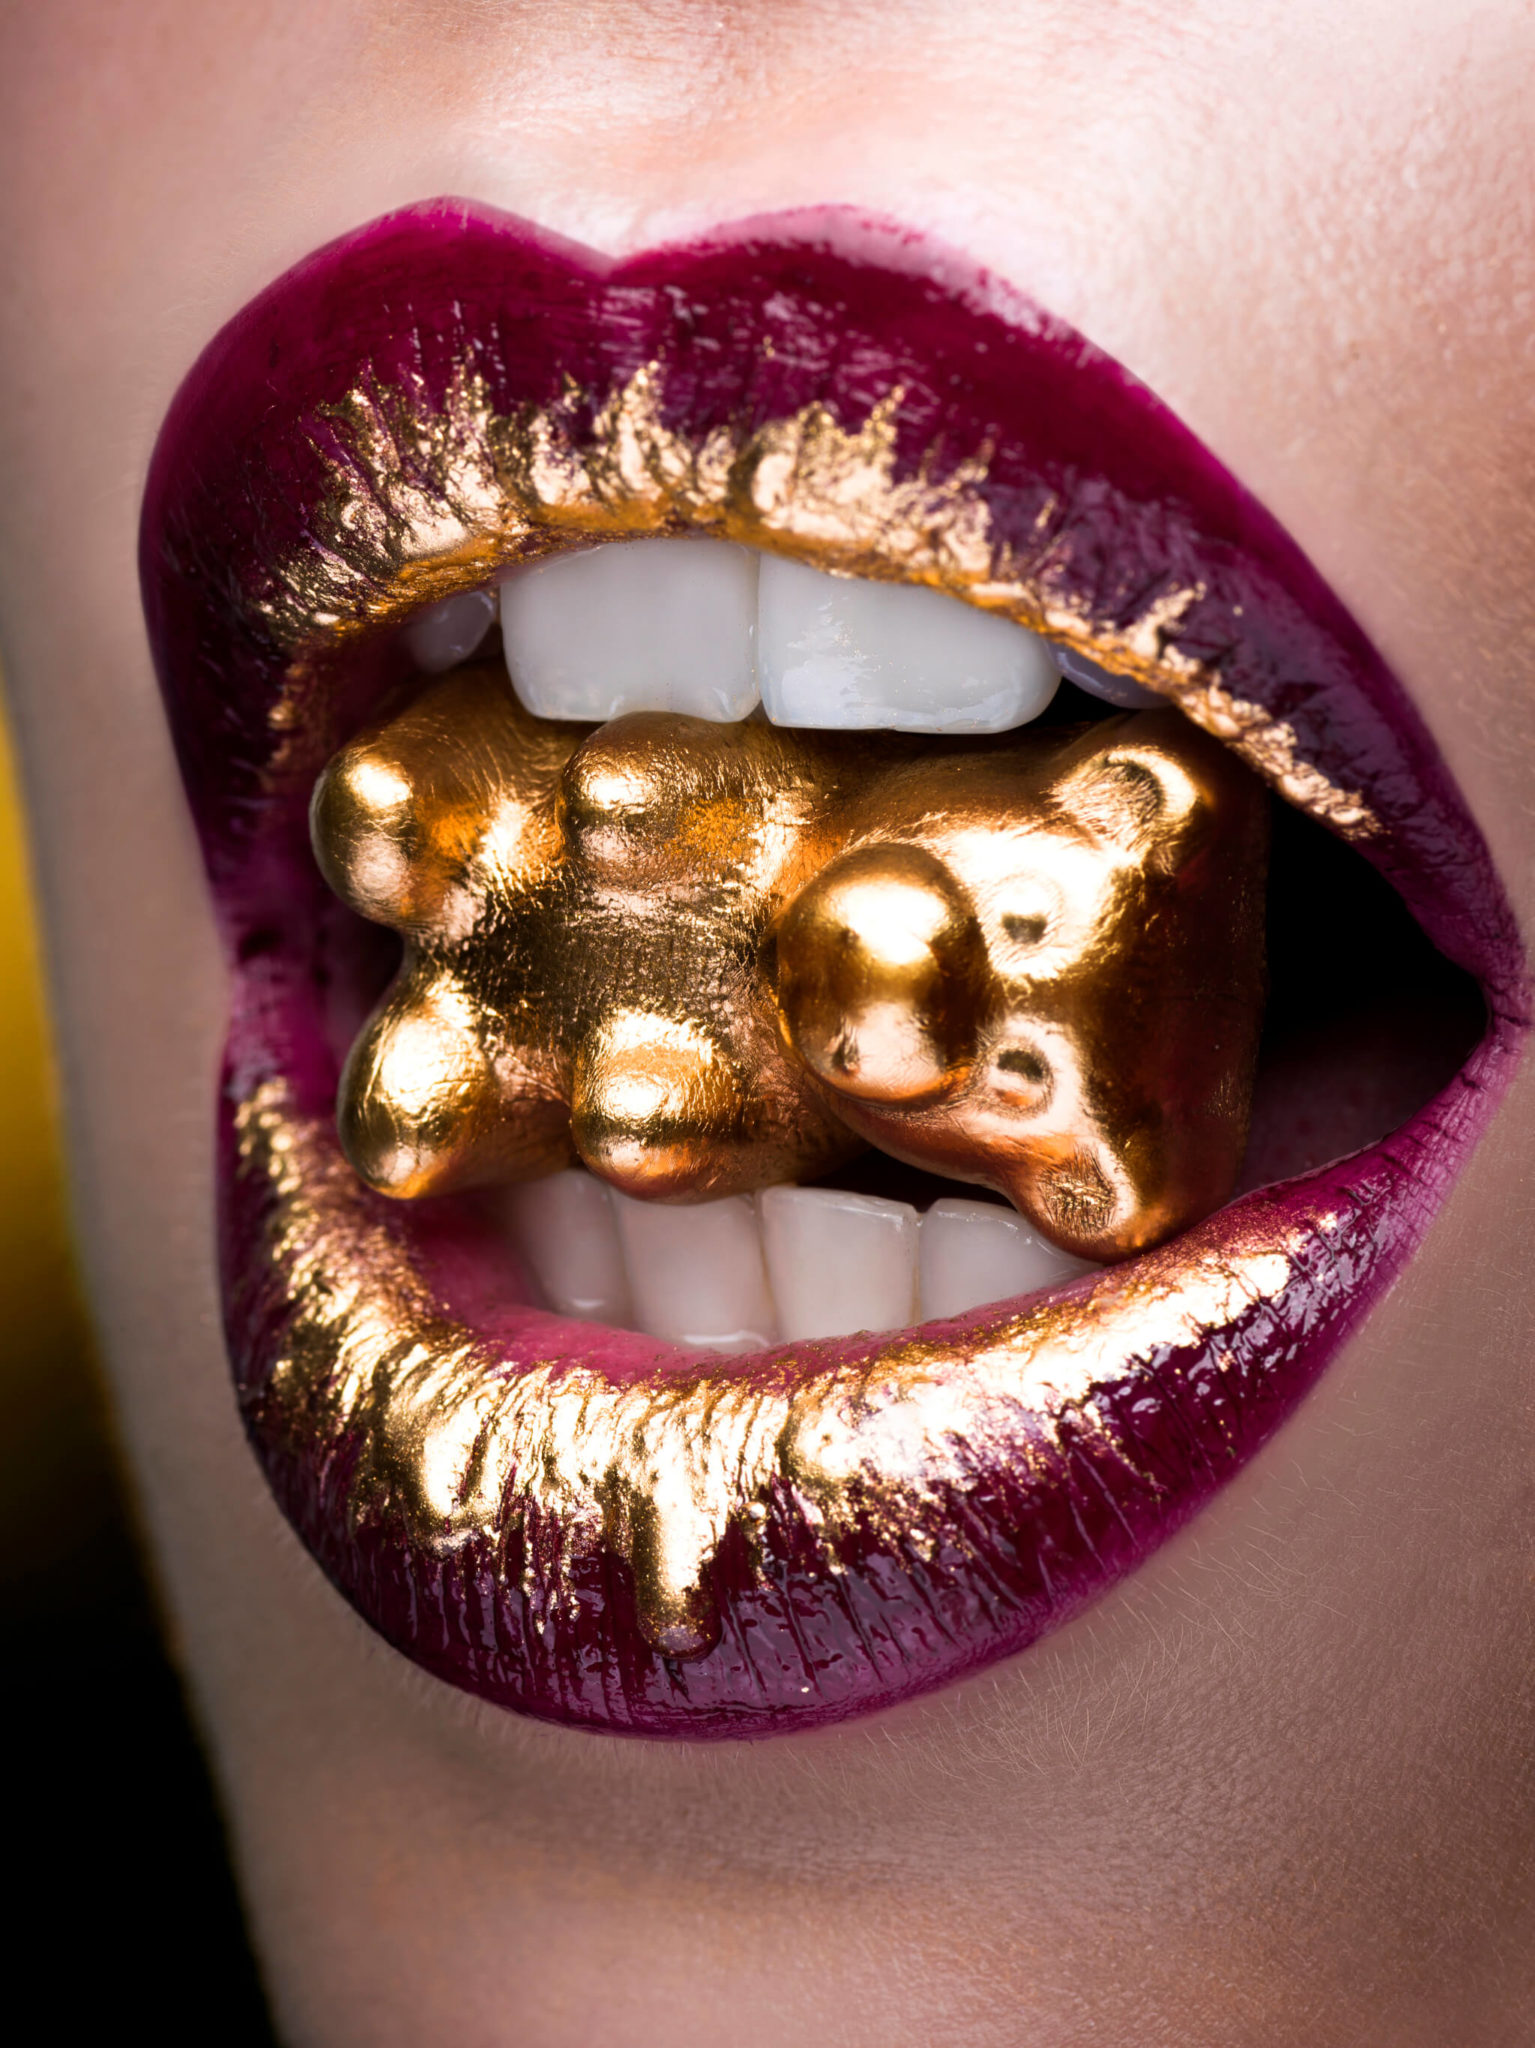 photographed Beauty-makeup -shot red lips gummi bear French style by chris singer chrissinger